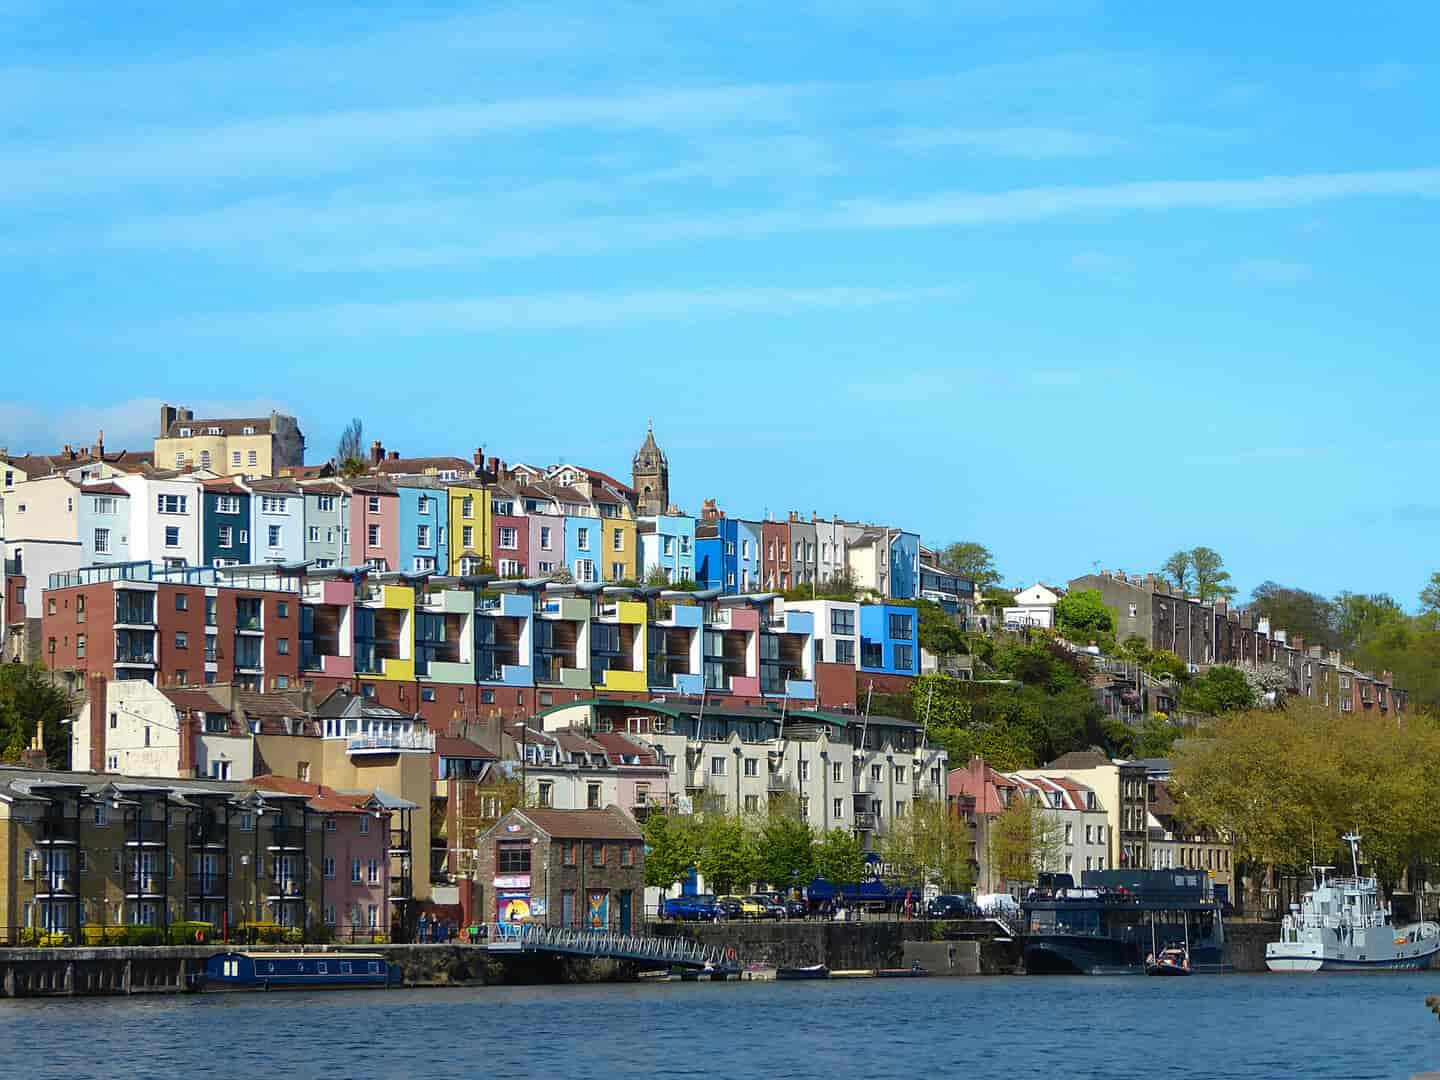 Student Accommodation in Bristol - The Harbourside looking towards Hotwells